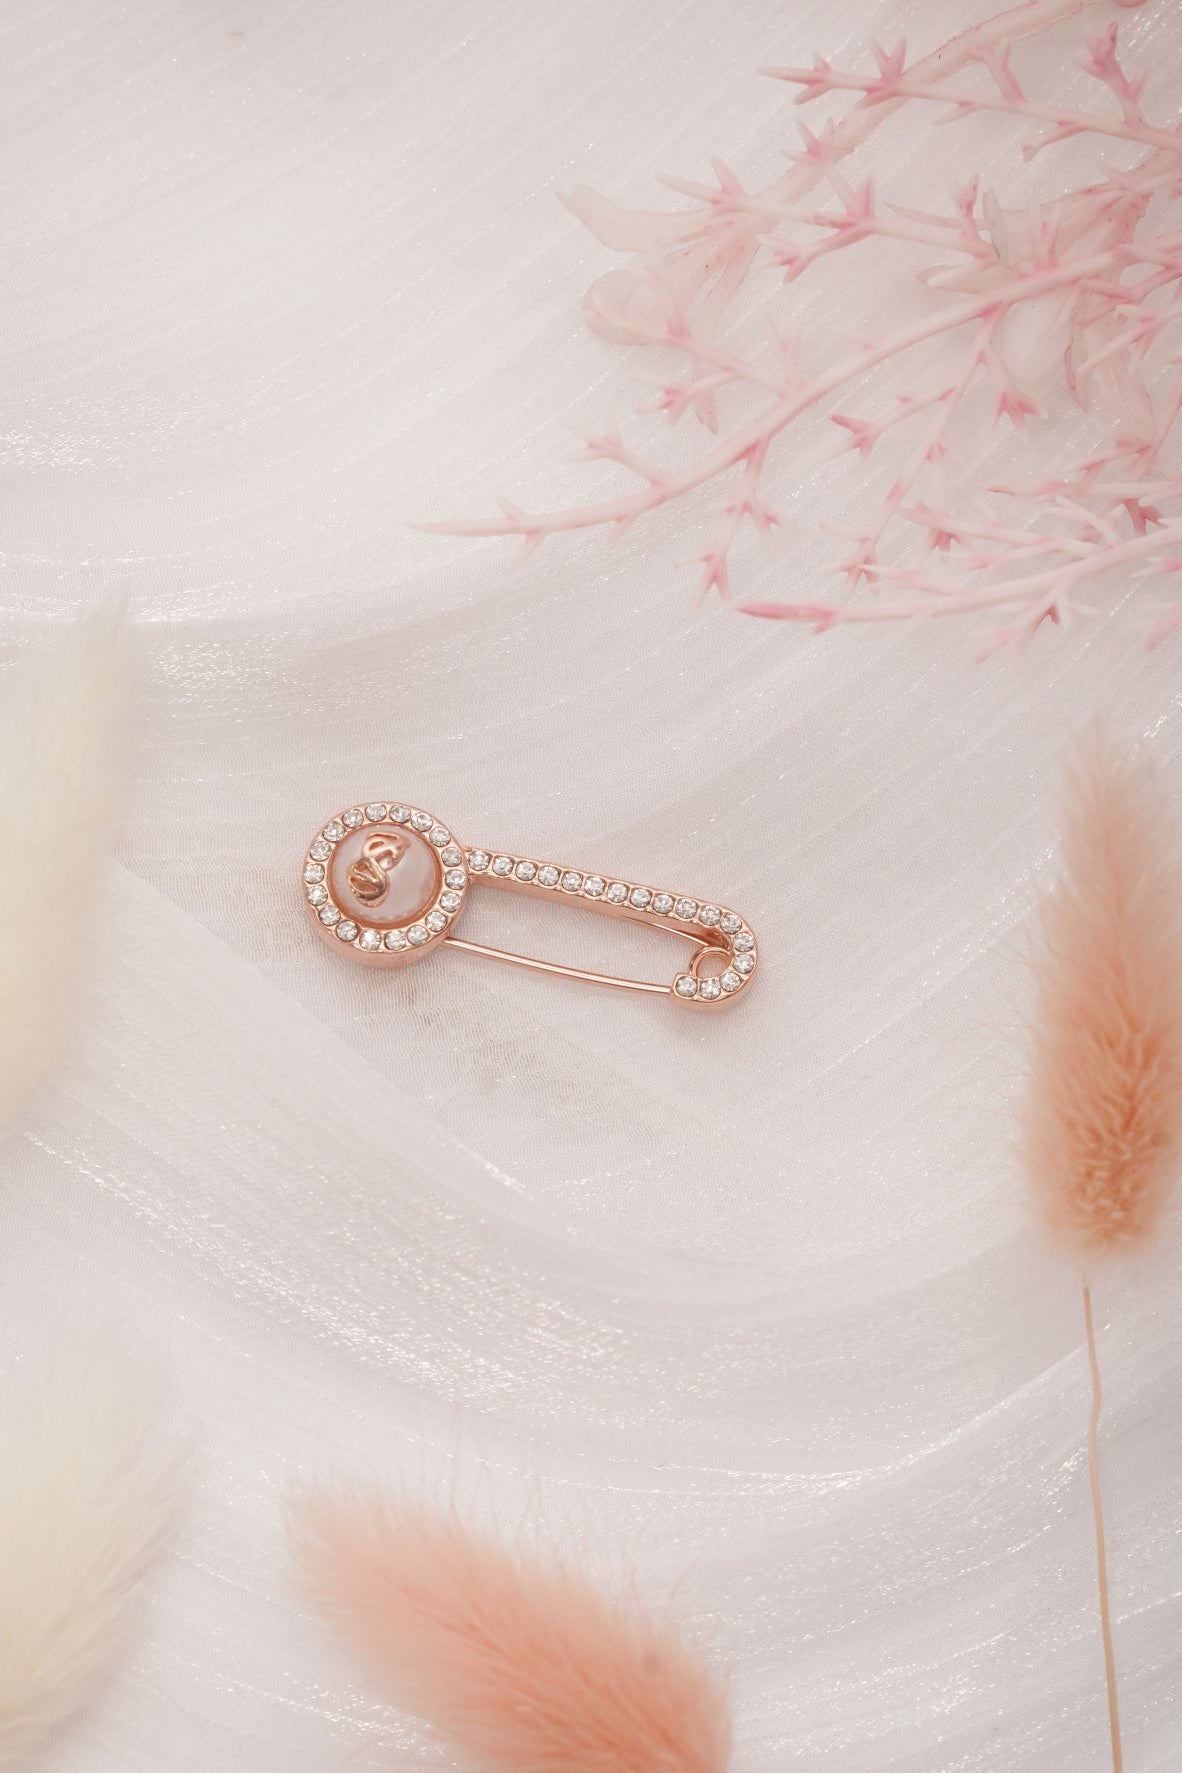 Safety Hijab Pin With Pearl - Rose Gold